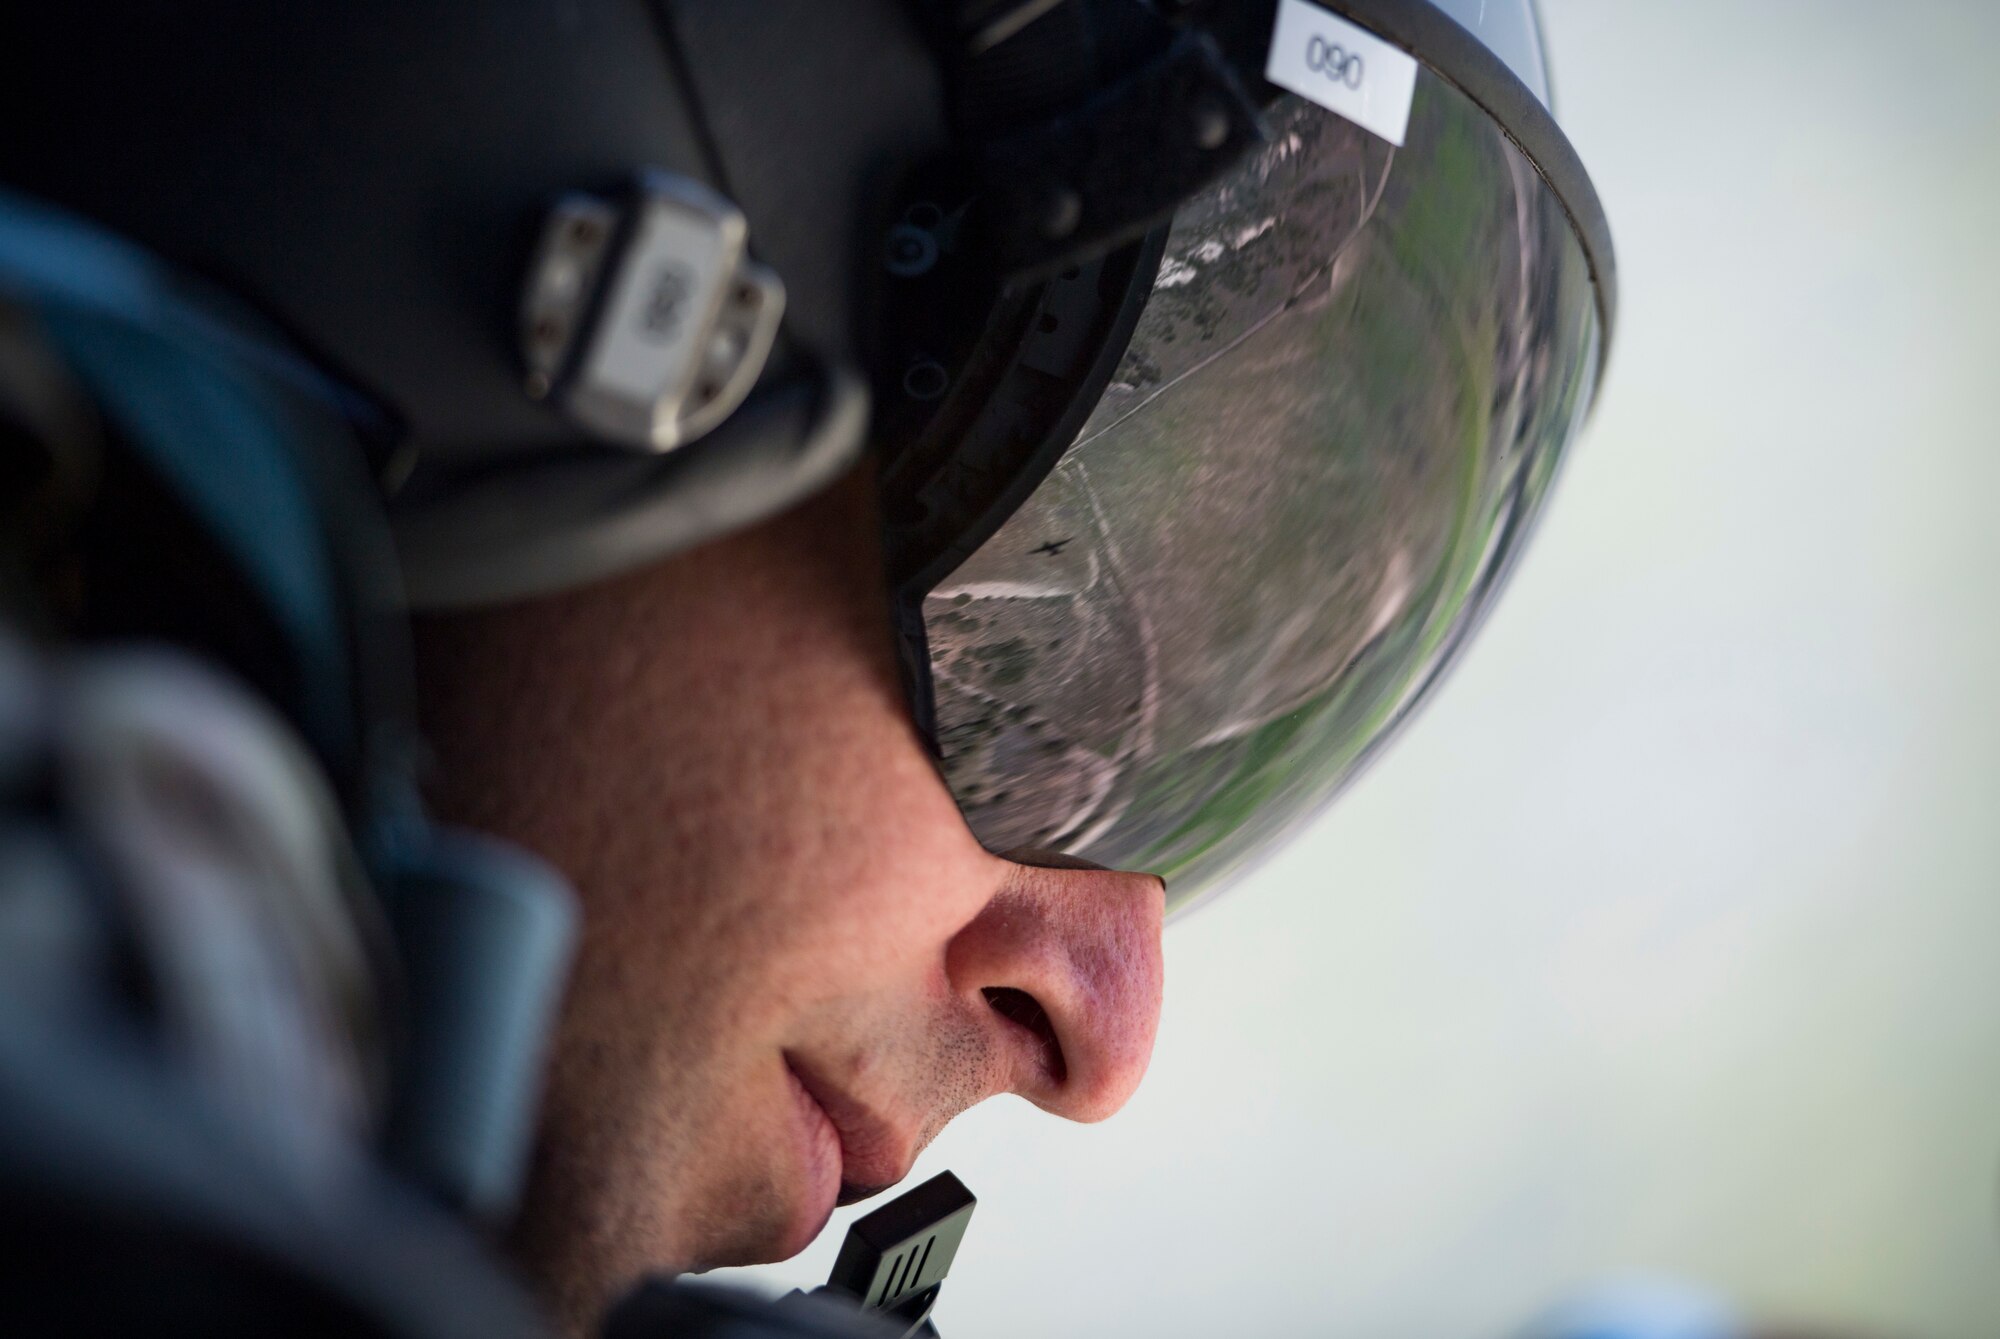 Tech. Sgt. Brandon Garbrick, 71st Rescue Squadron HC-130J Combat King II loadmaster, looks out of the door of an HC-130J during Tiger Rescue IV, March 27, 2018, at Vandenberg Air Force Base, Calif.  The four-day exercise challenged Airmen from multiple rescue squadrons to bring the capabilities of the personnel recovery triad together to successfully complete rescue missions and maintain proficiency. The three branches of the personnel recovery triad are the HC-130J, HH-60G Pave Hawk and the guardian angel weapons system or pararescuemen. (U.S. Air Force photo by Senior Airman Janiqua P. Robinson)